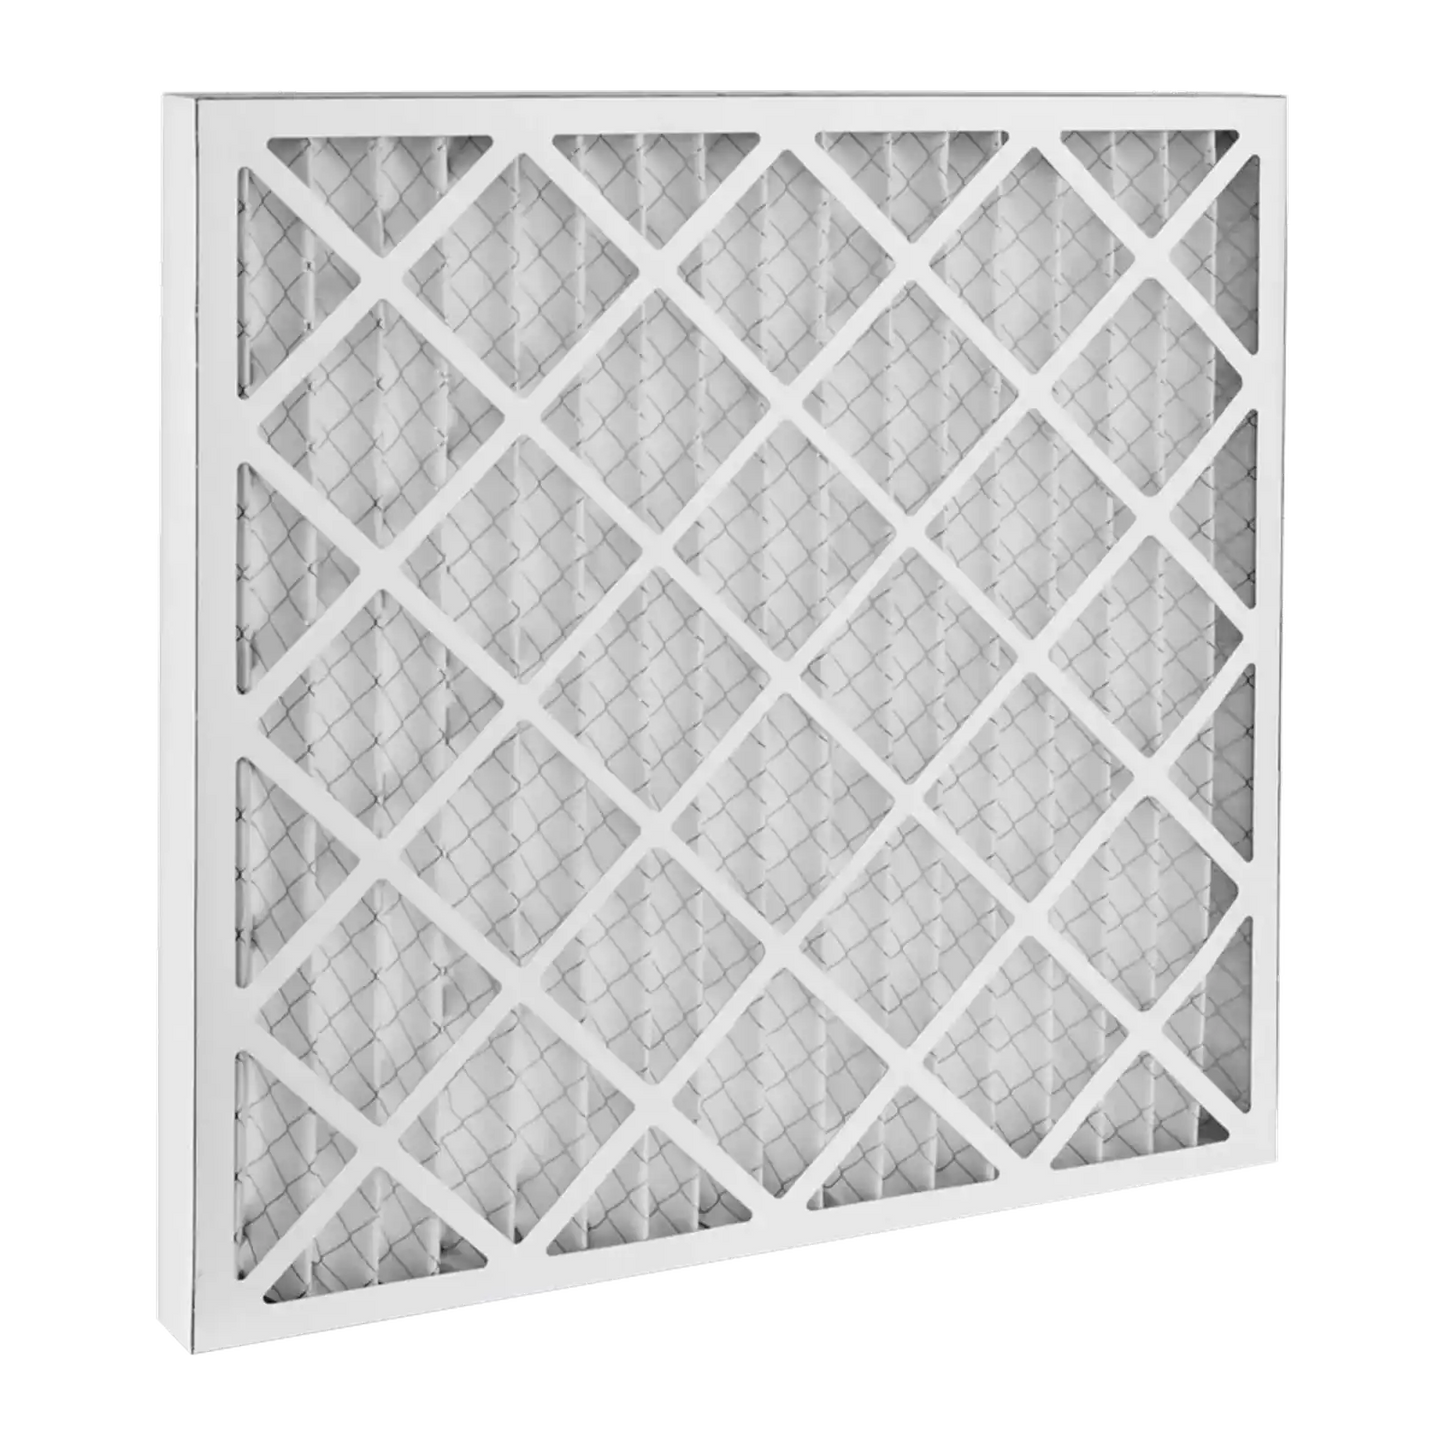 Dafco 10x20x1 Furnace AC Filter - Case of 12